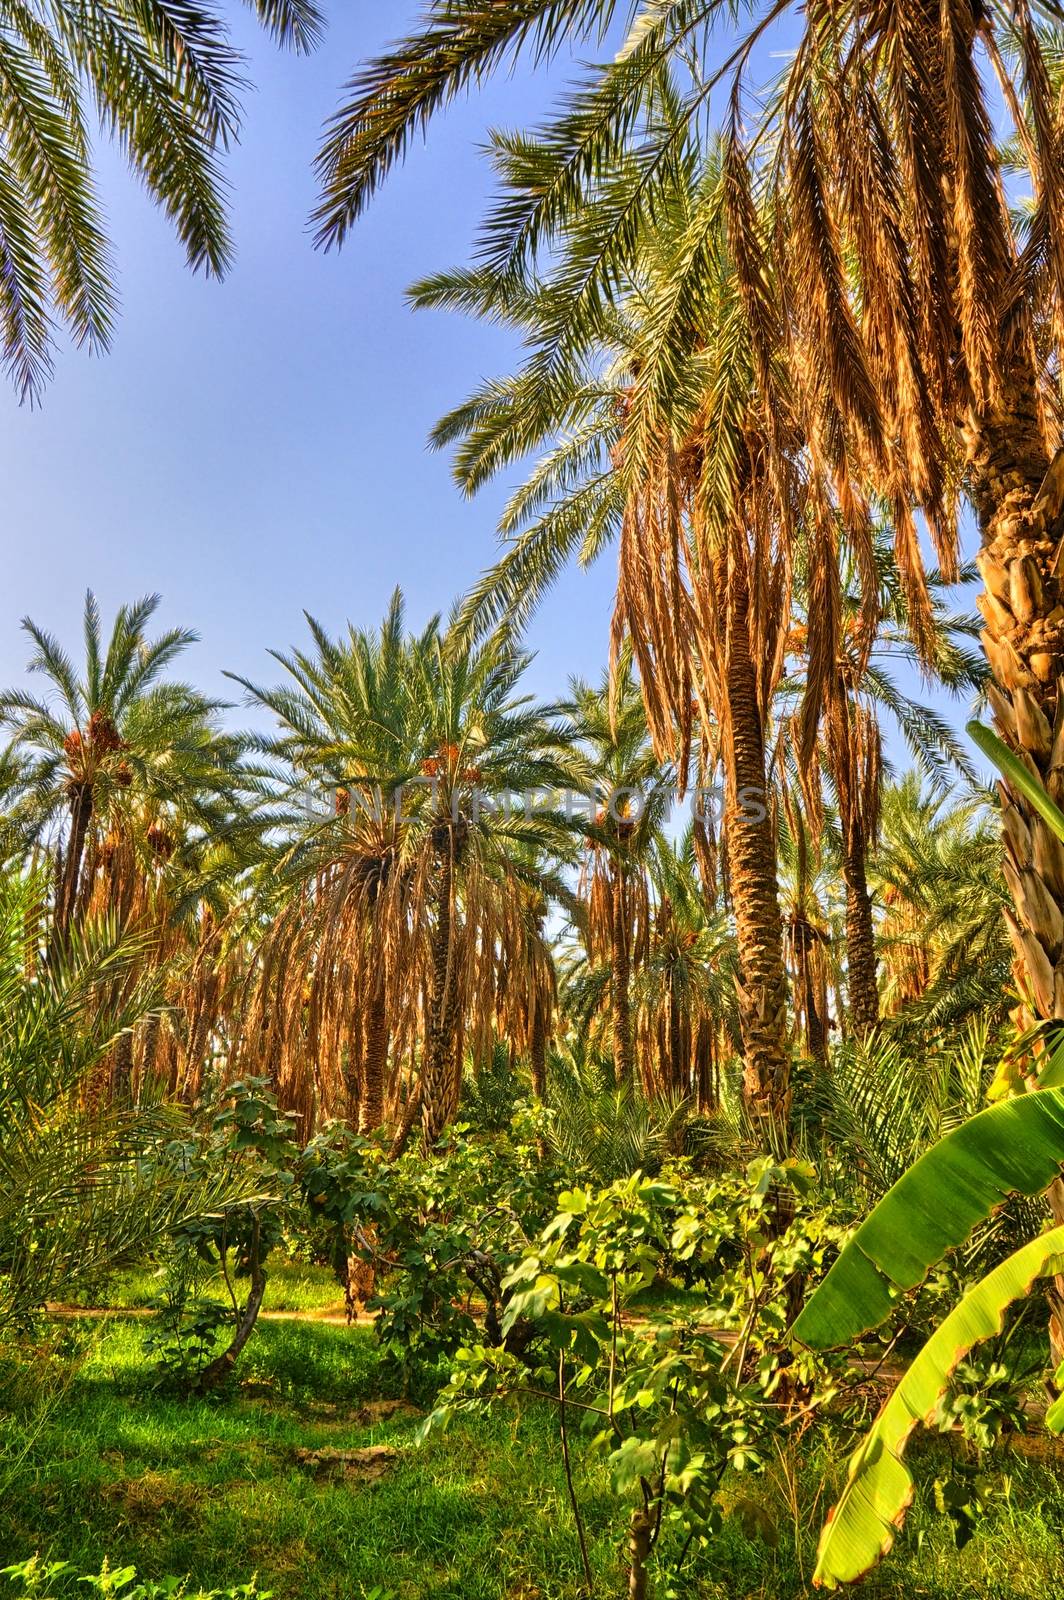 Date Palms in jungles, Tamerza oasis, Sahara Desert, Tunisia, Af by Eagle2308